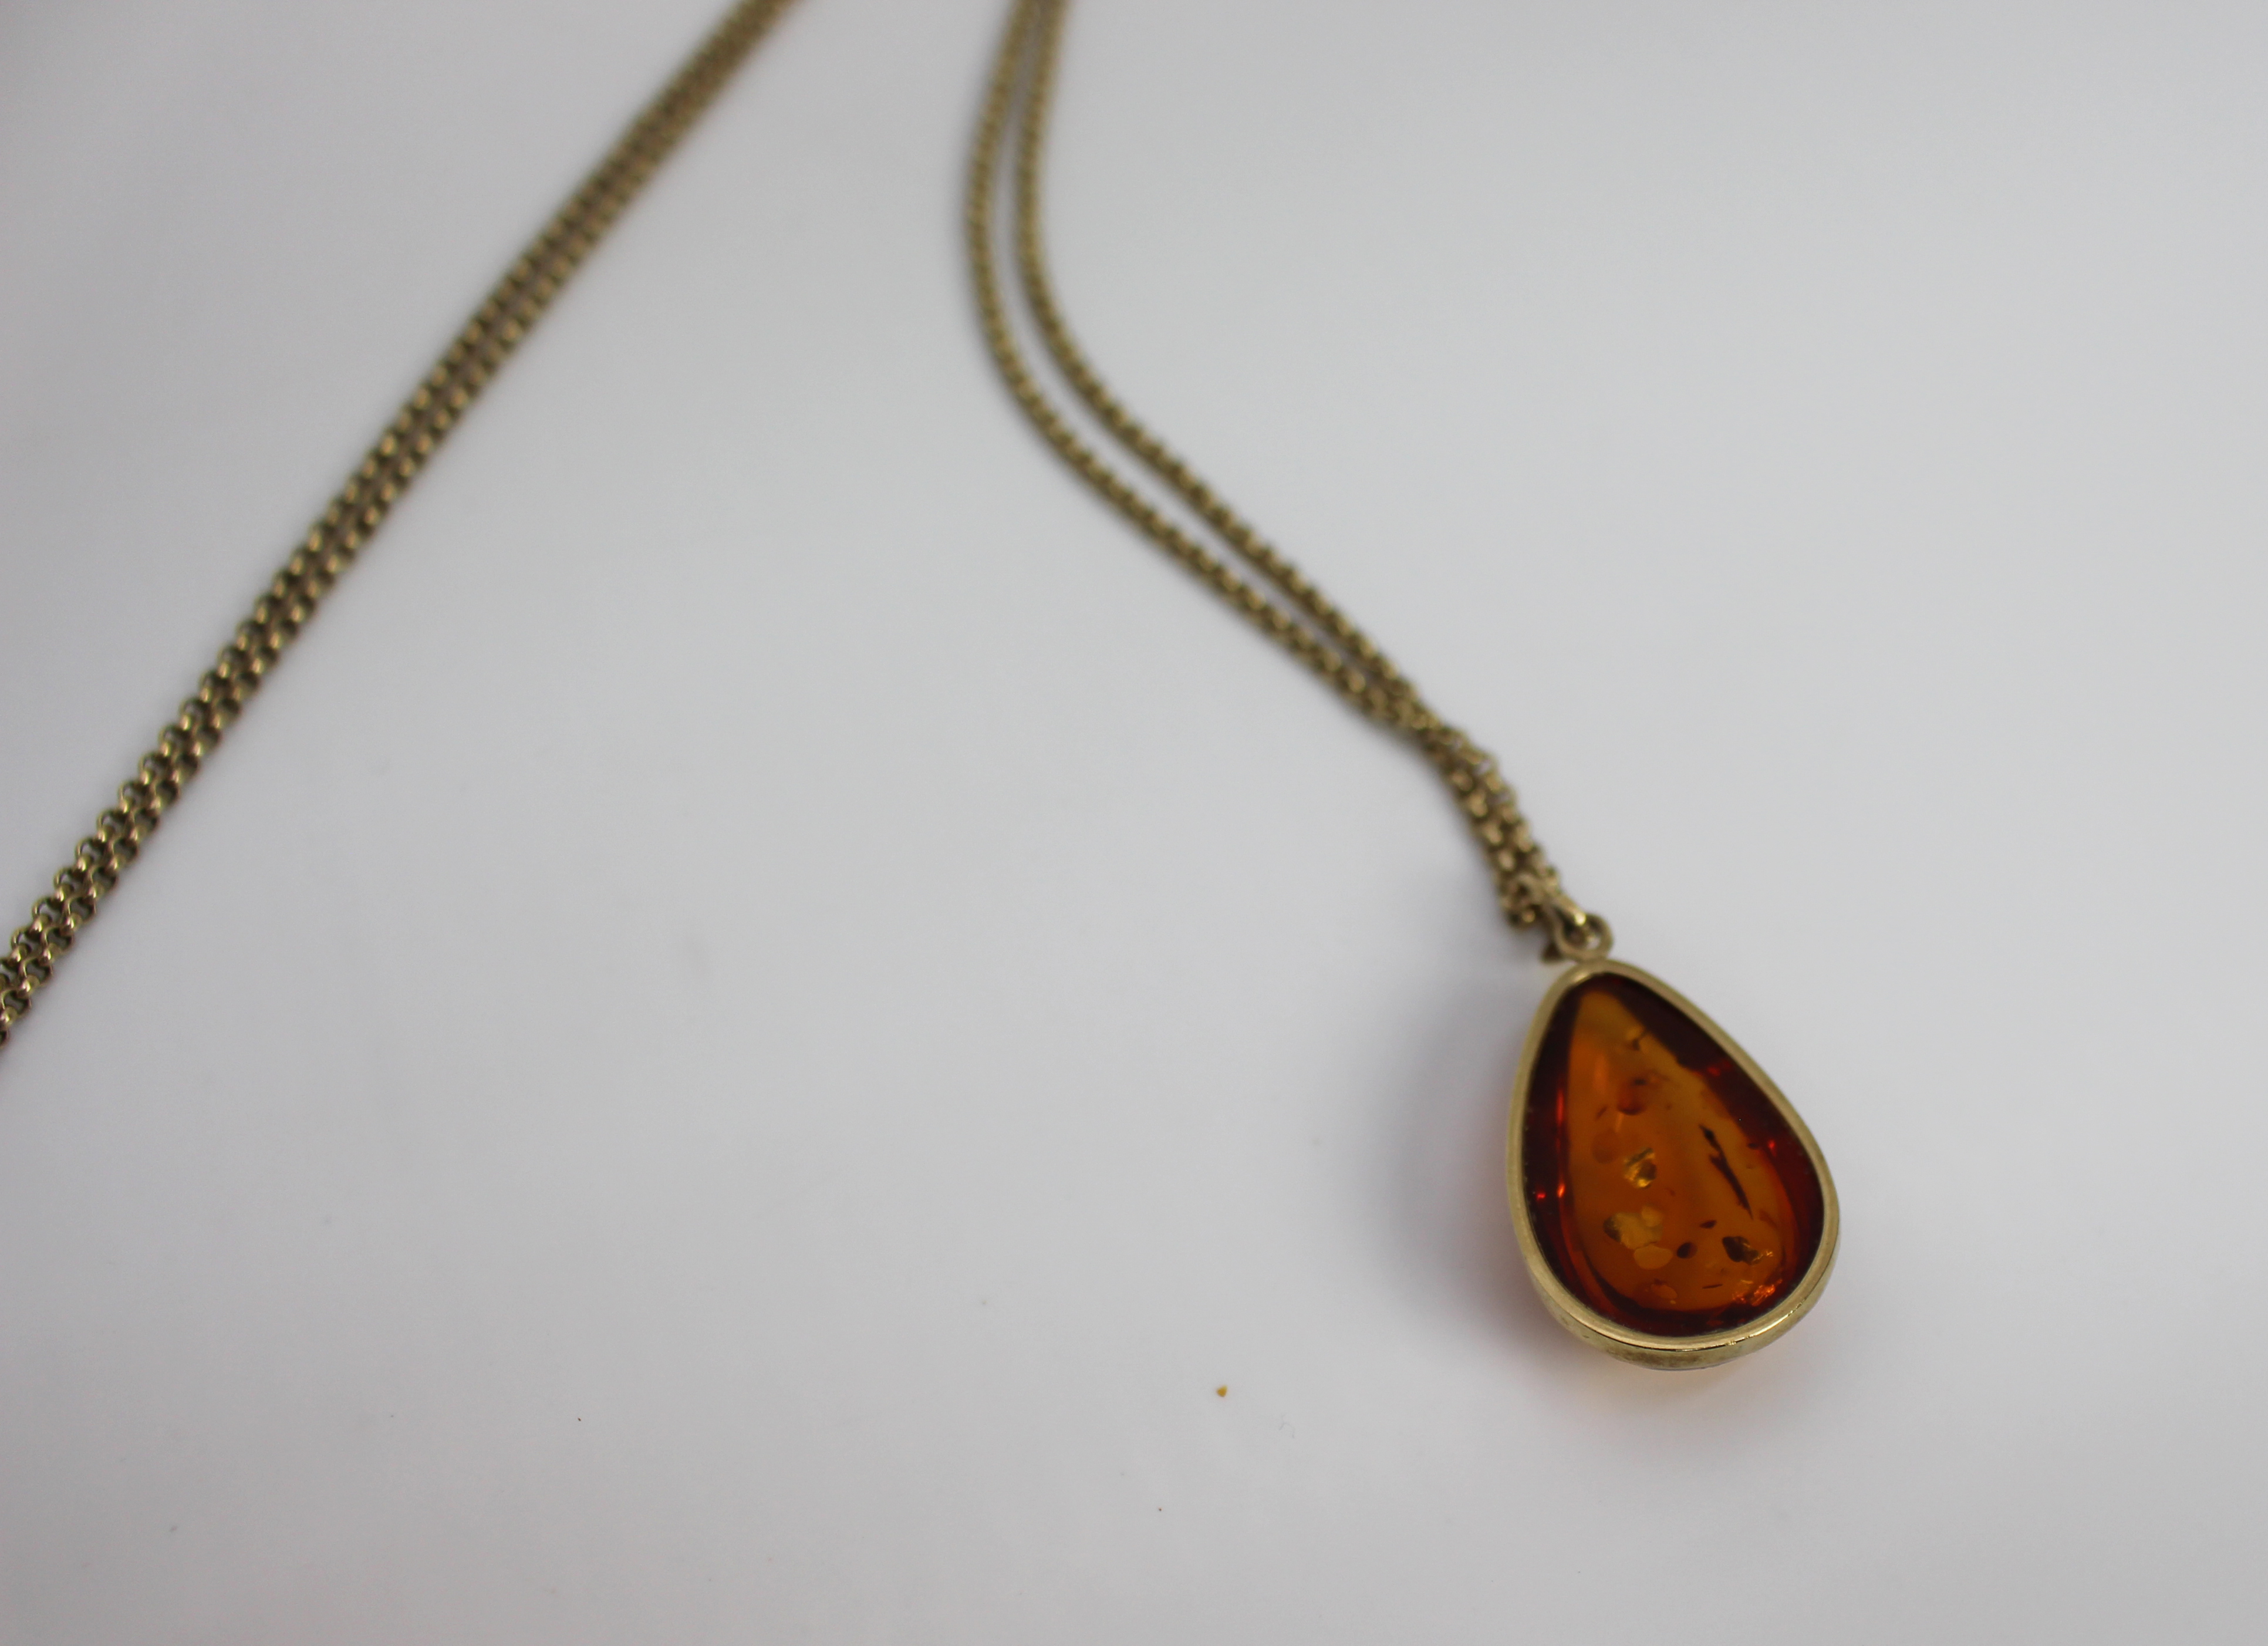 Amber Pendant on Gold Chain - Image 3 of 4